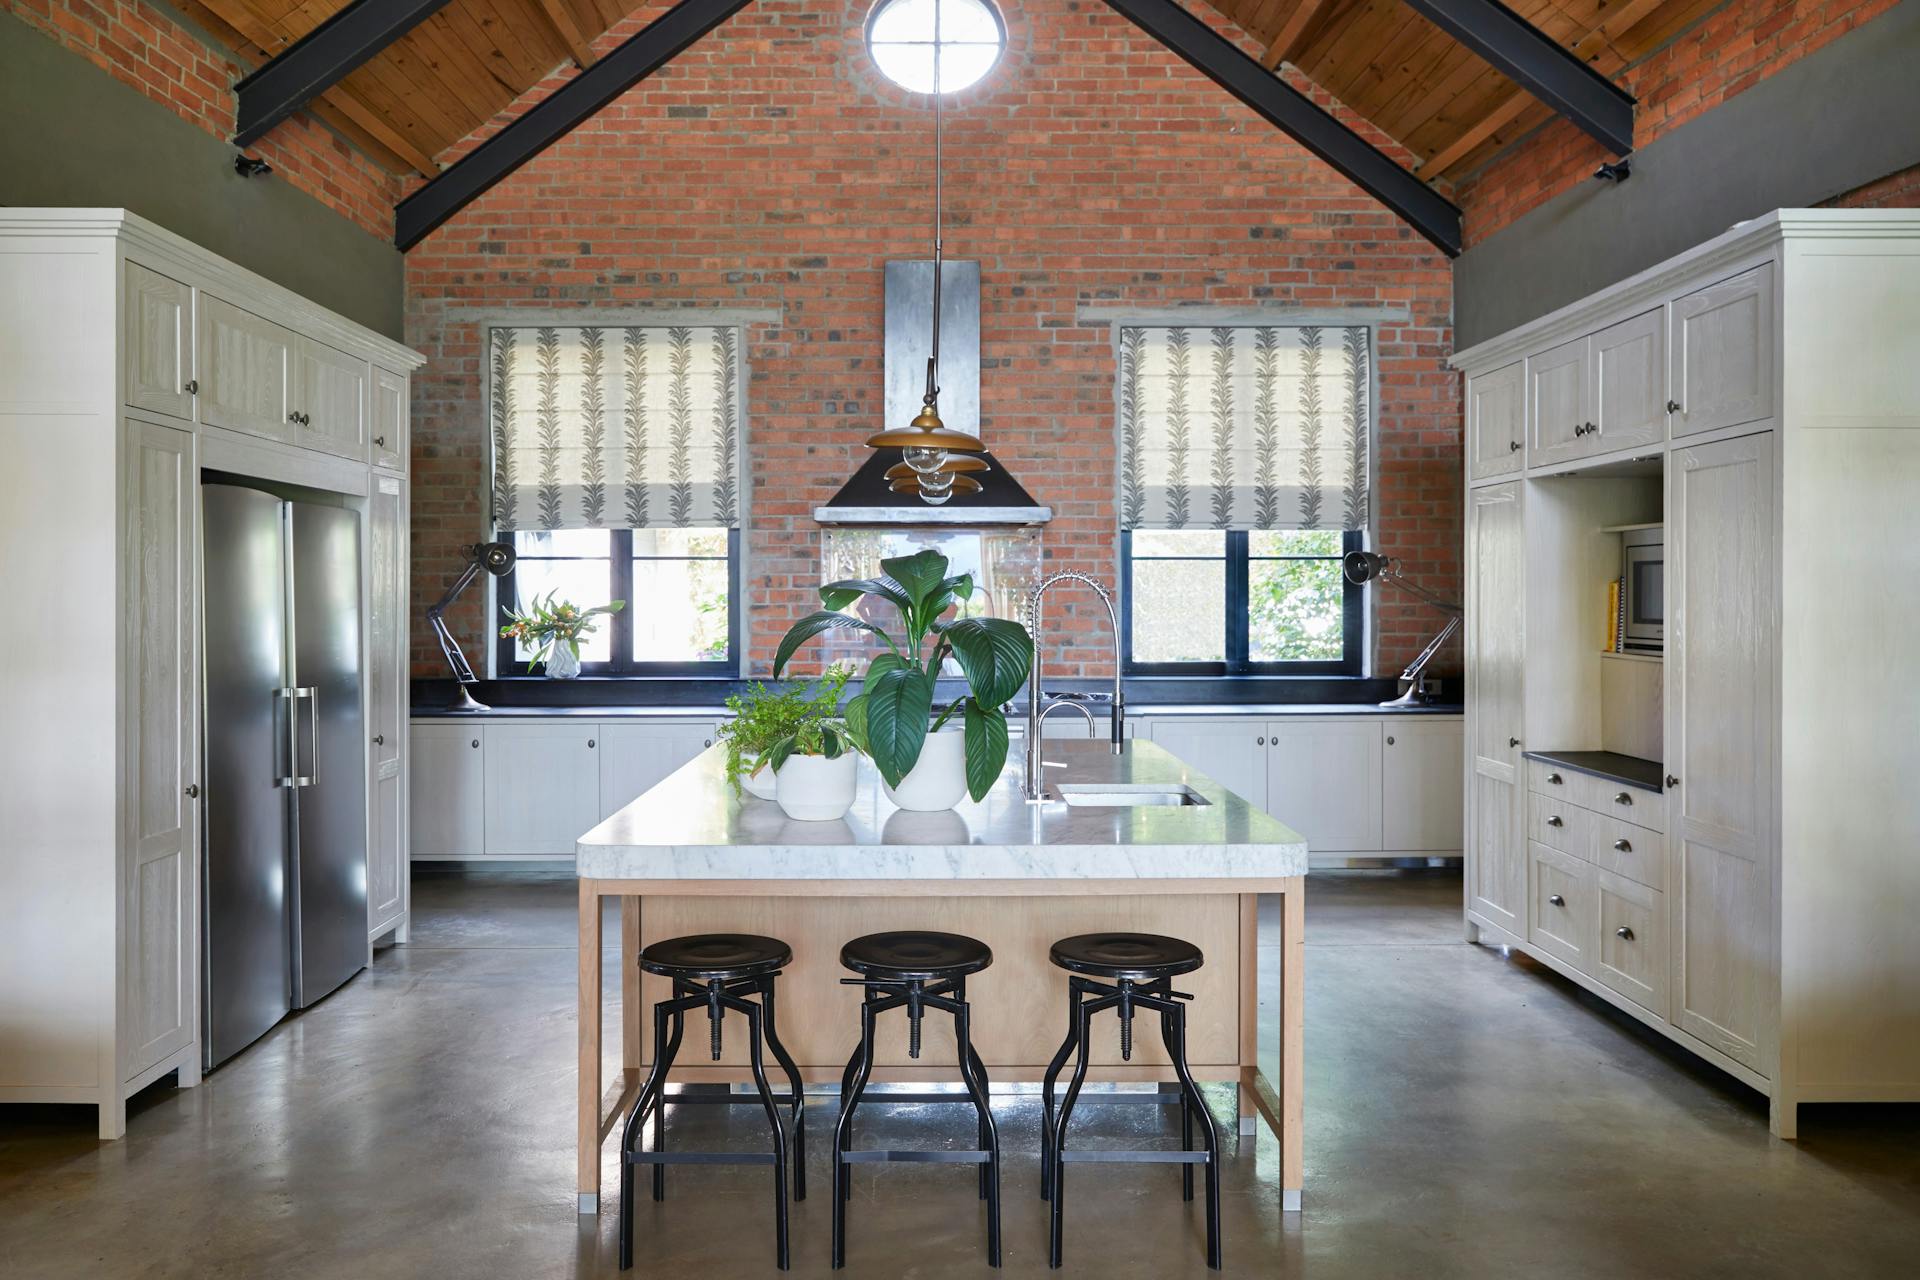 A modern, A-frame kitchen with an exposed brick wall features a central kitchen island and white cabinetry. Bar stools are arranged in front of the island and potted plants sit on its surface